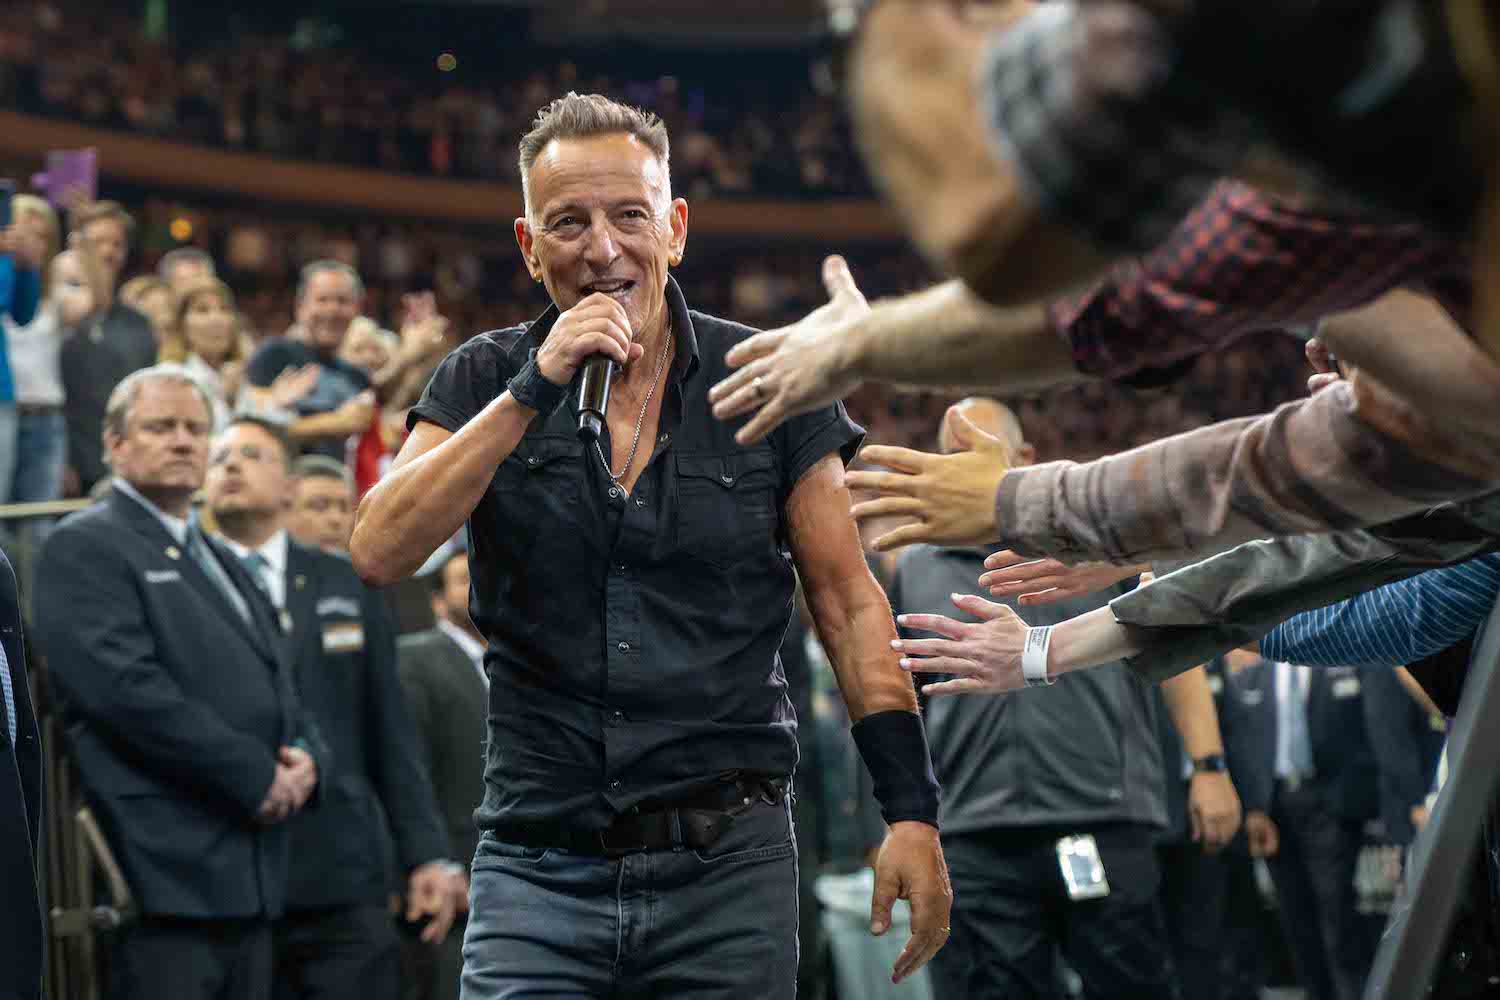 Bruce Springsteen & E Street Band at Madison Square Garden, New York, NY on April 1, 2023.